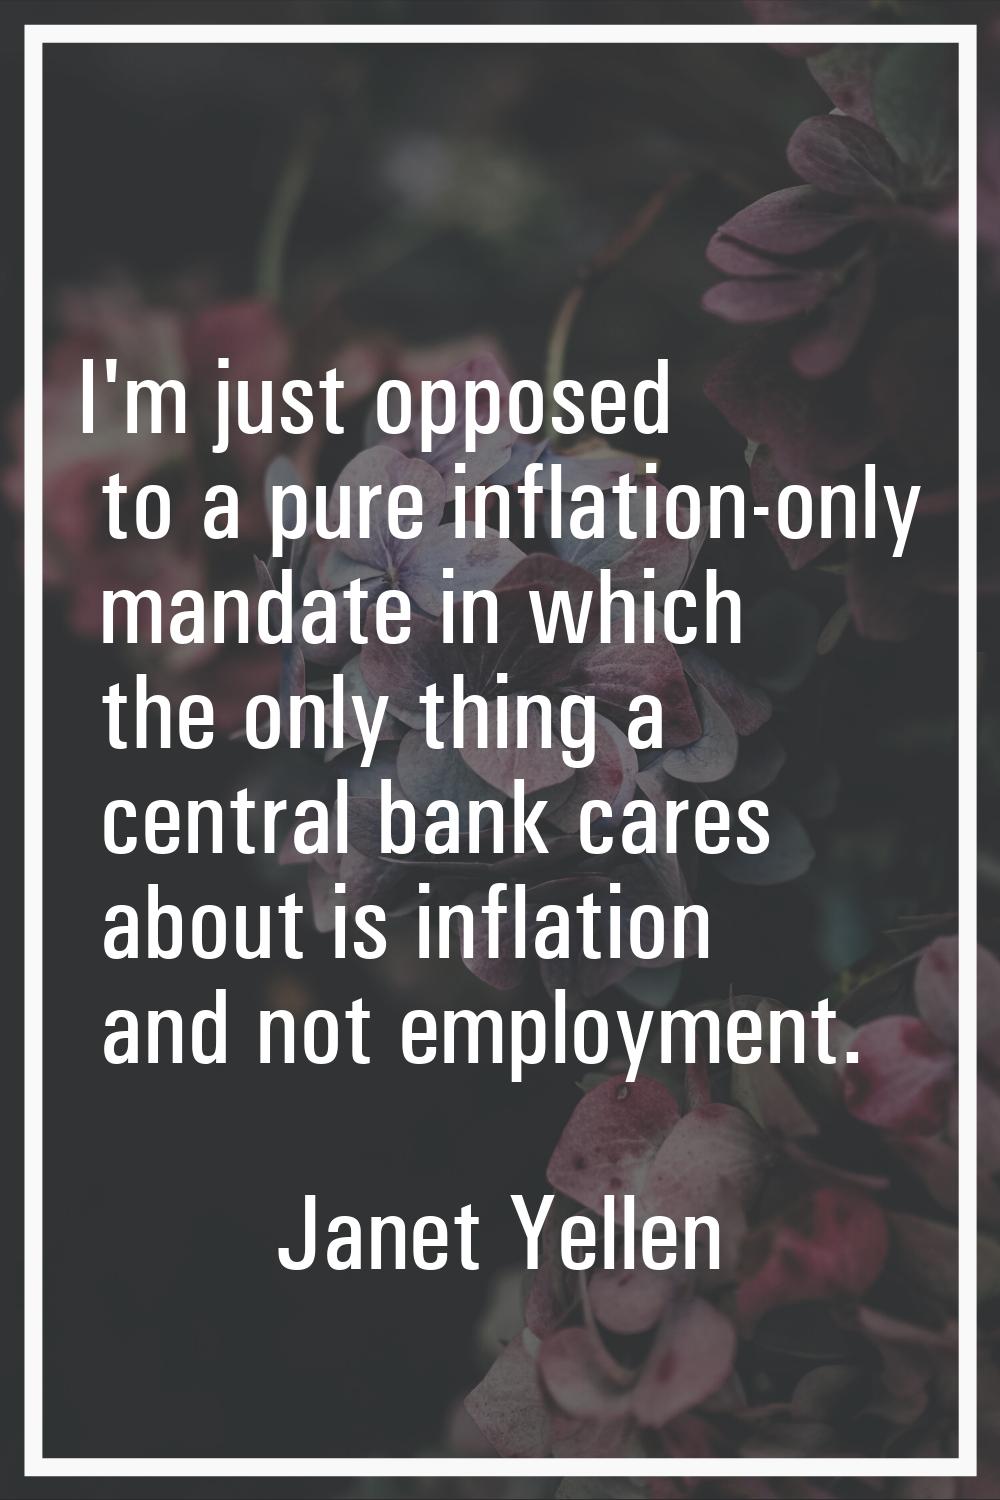 I'm just opposed to a pure inflation-only mandate in which the only thing a central bank cares abou